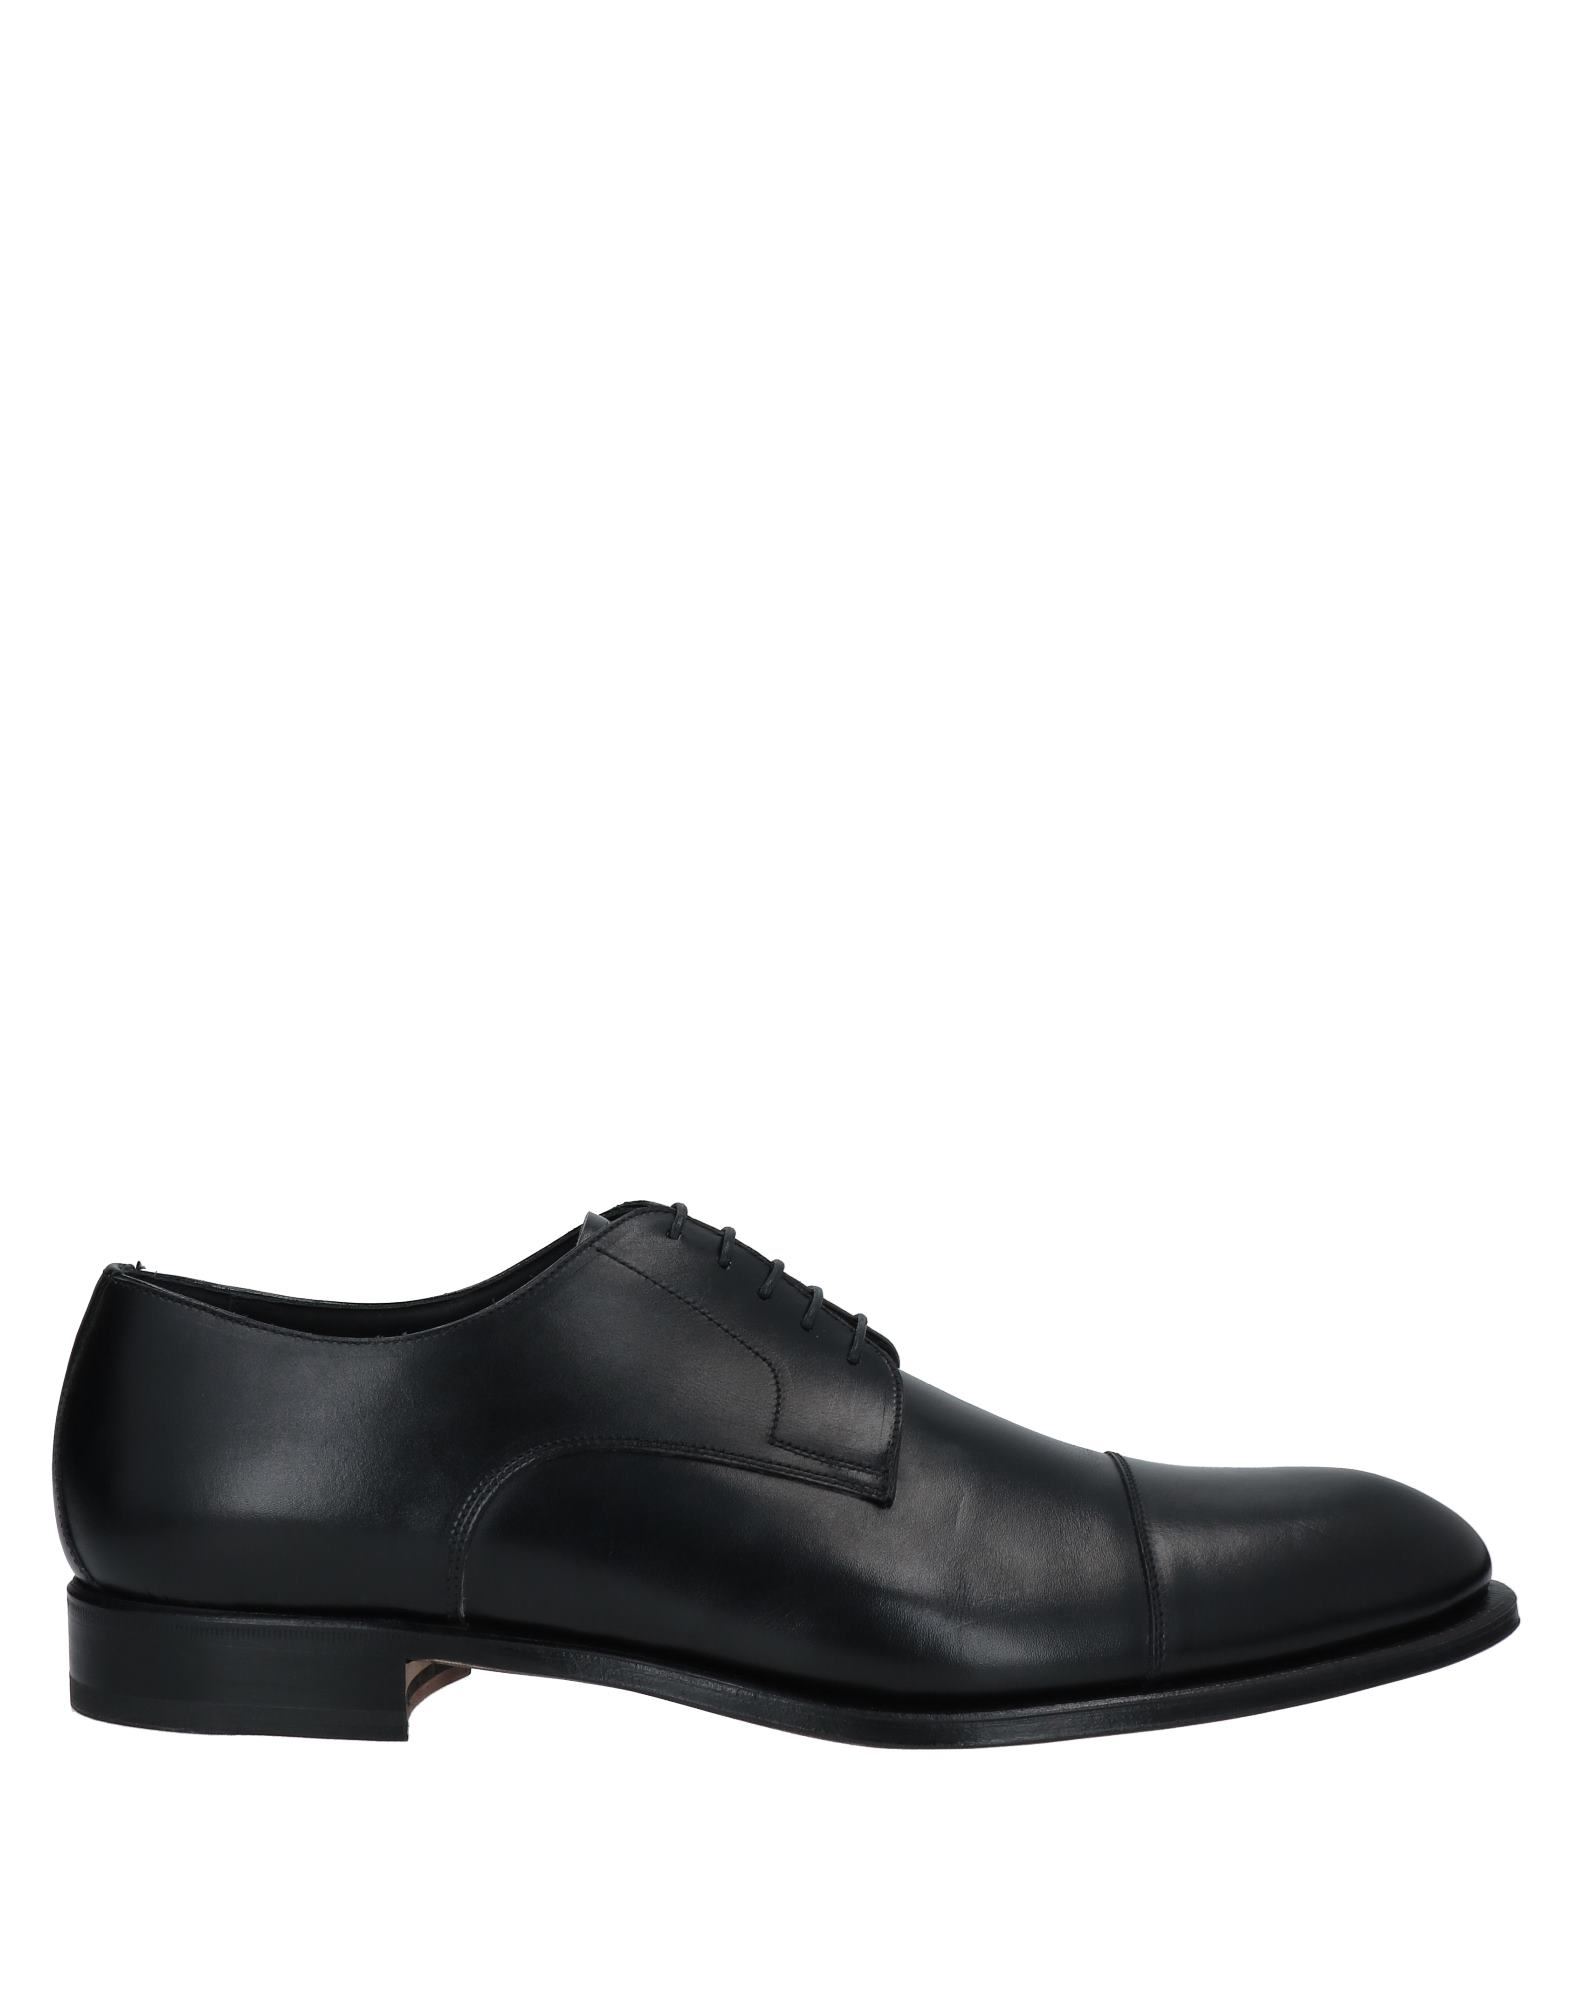 J. HOLBENS Lace-up shoes